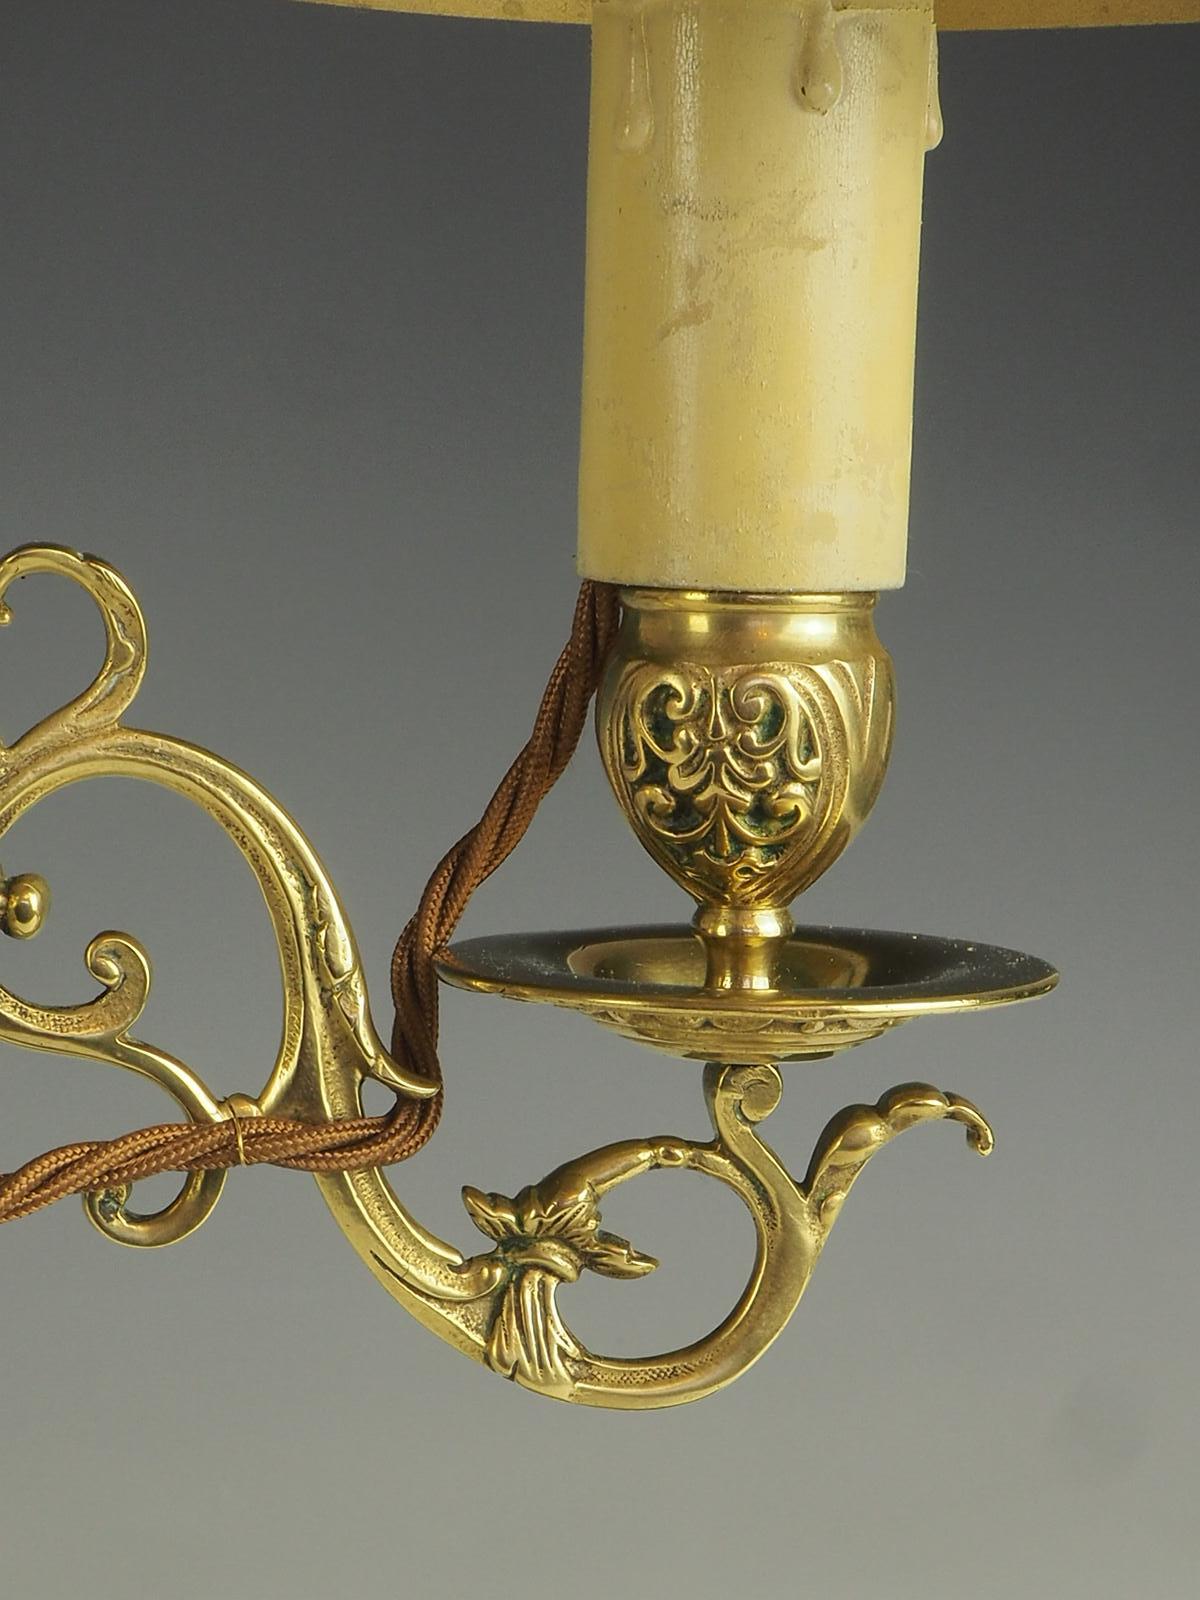 Antique French Bouilloute Candlestick Table Lamp For Sale 10